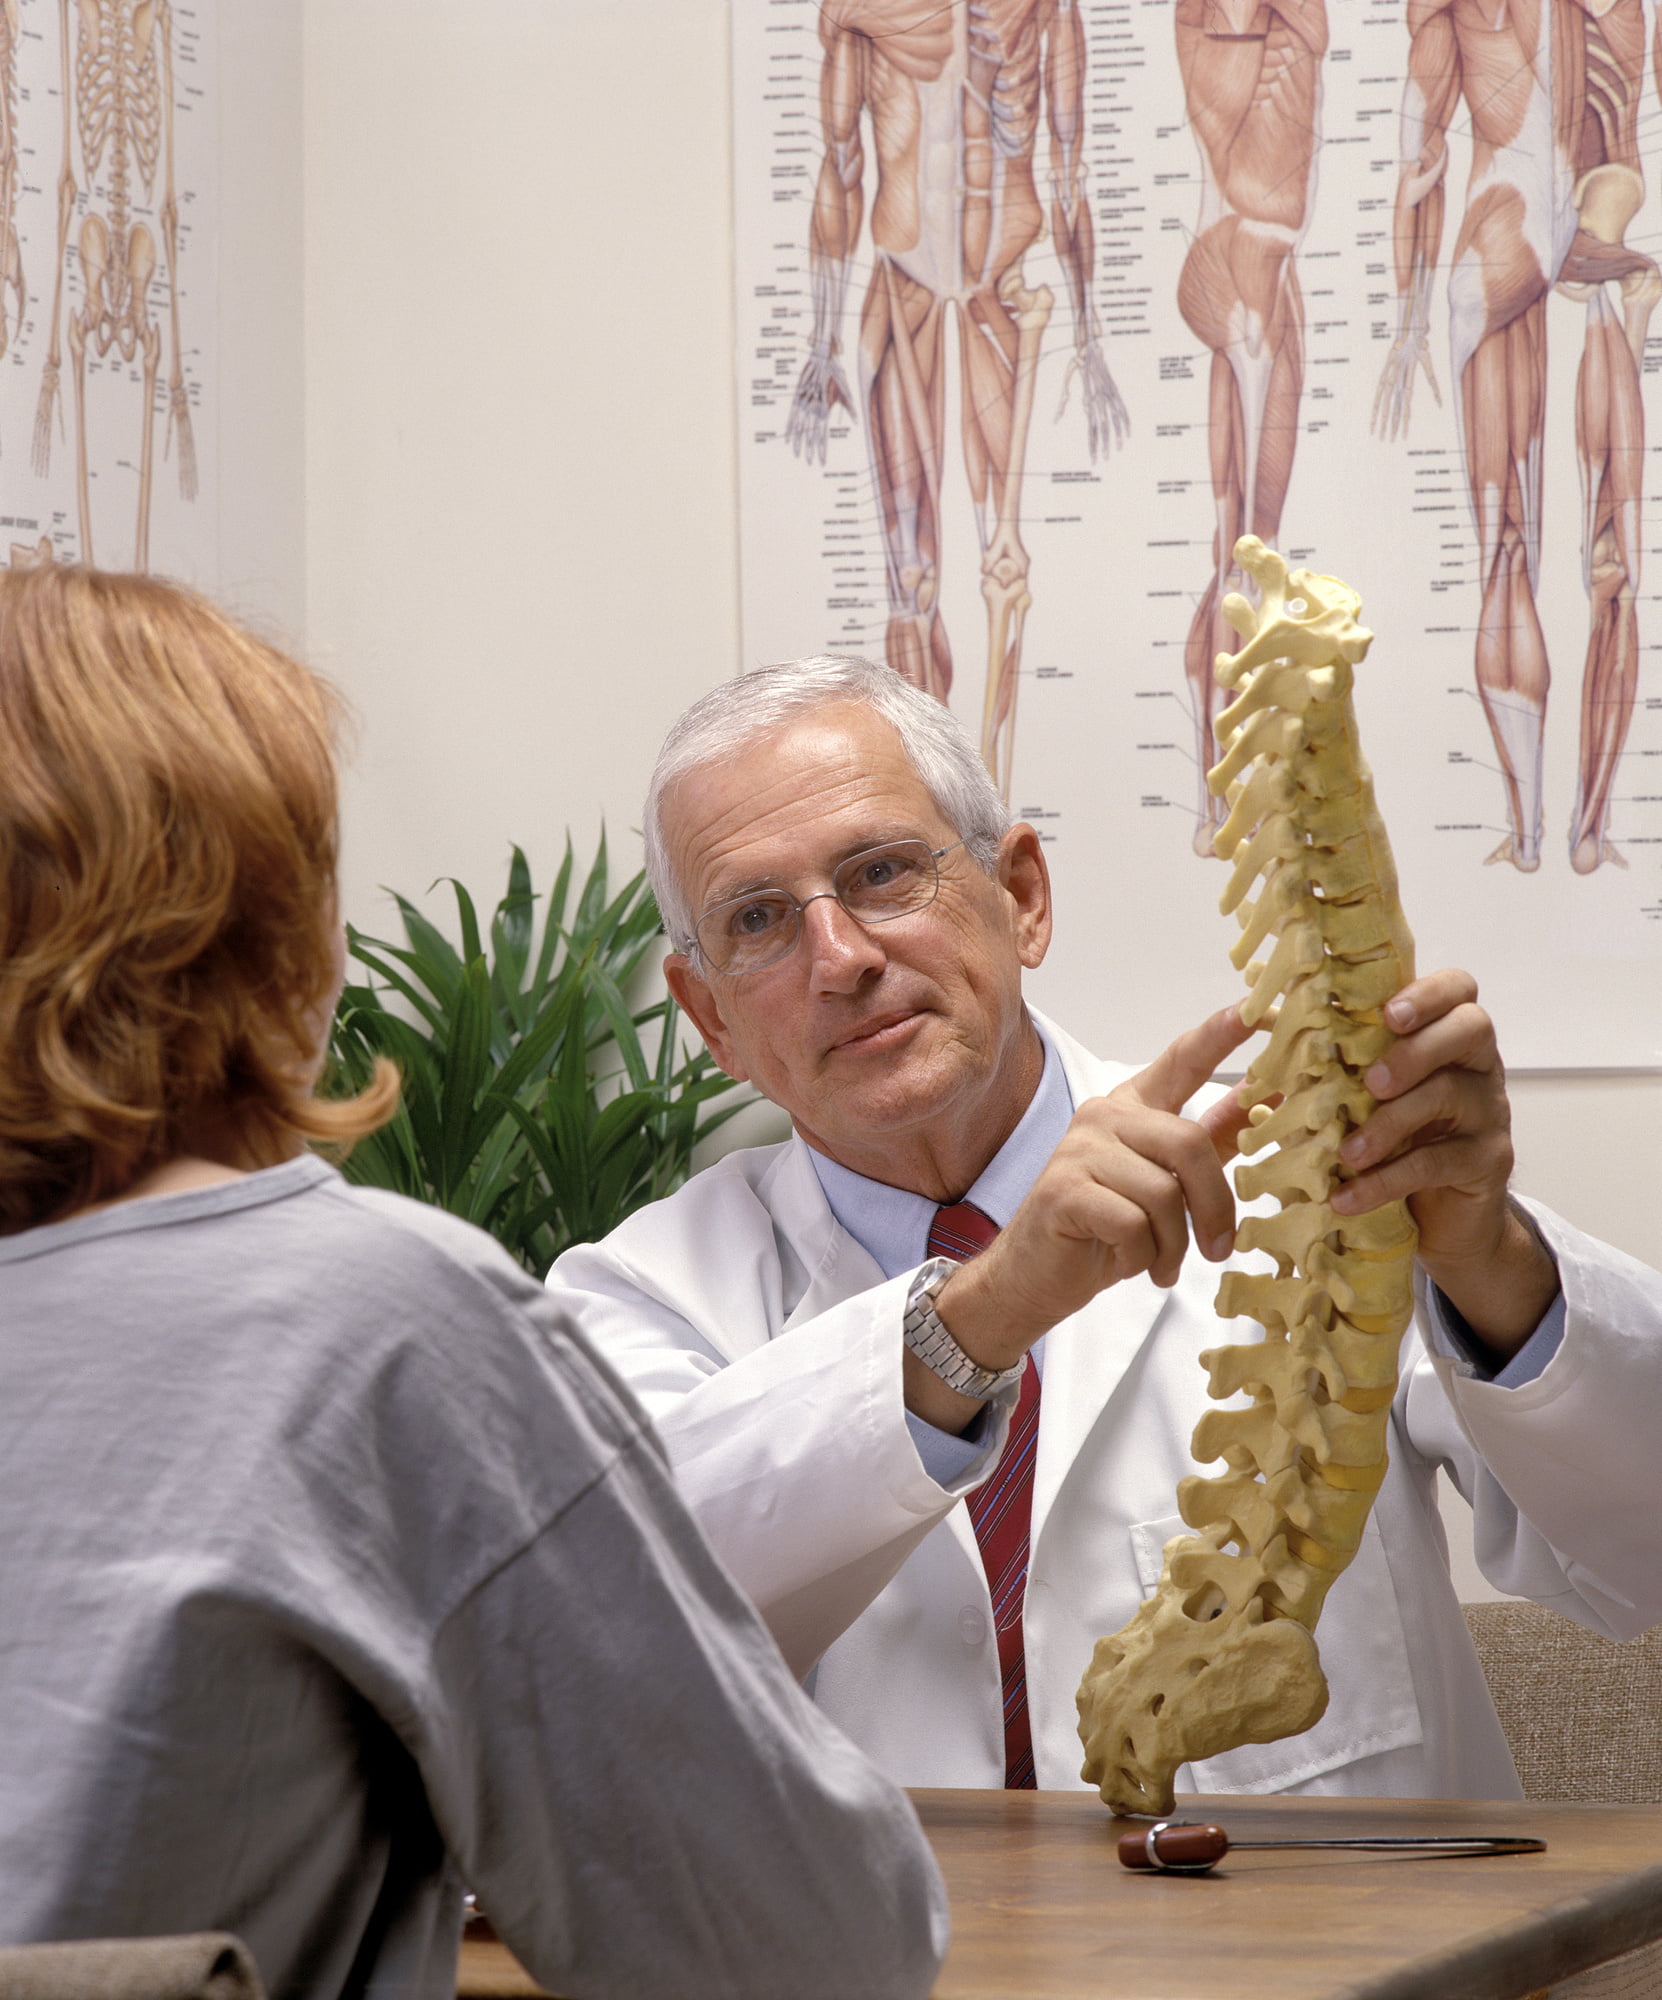 Thinking about receiving chiropractor services? Read this brief guide to learn about what they do and how they can benefit you.